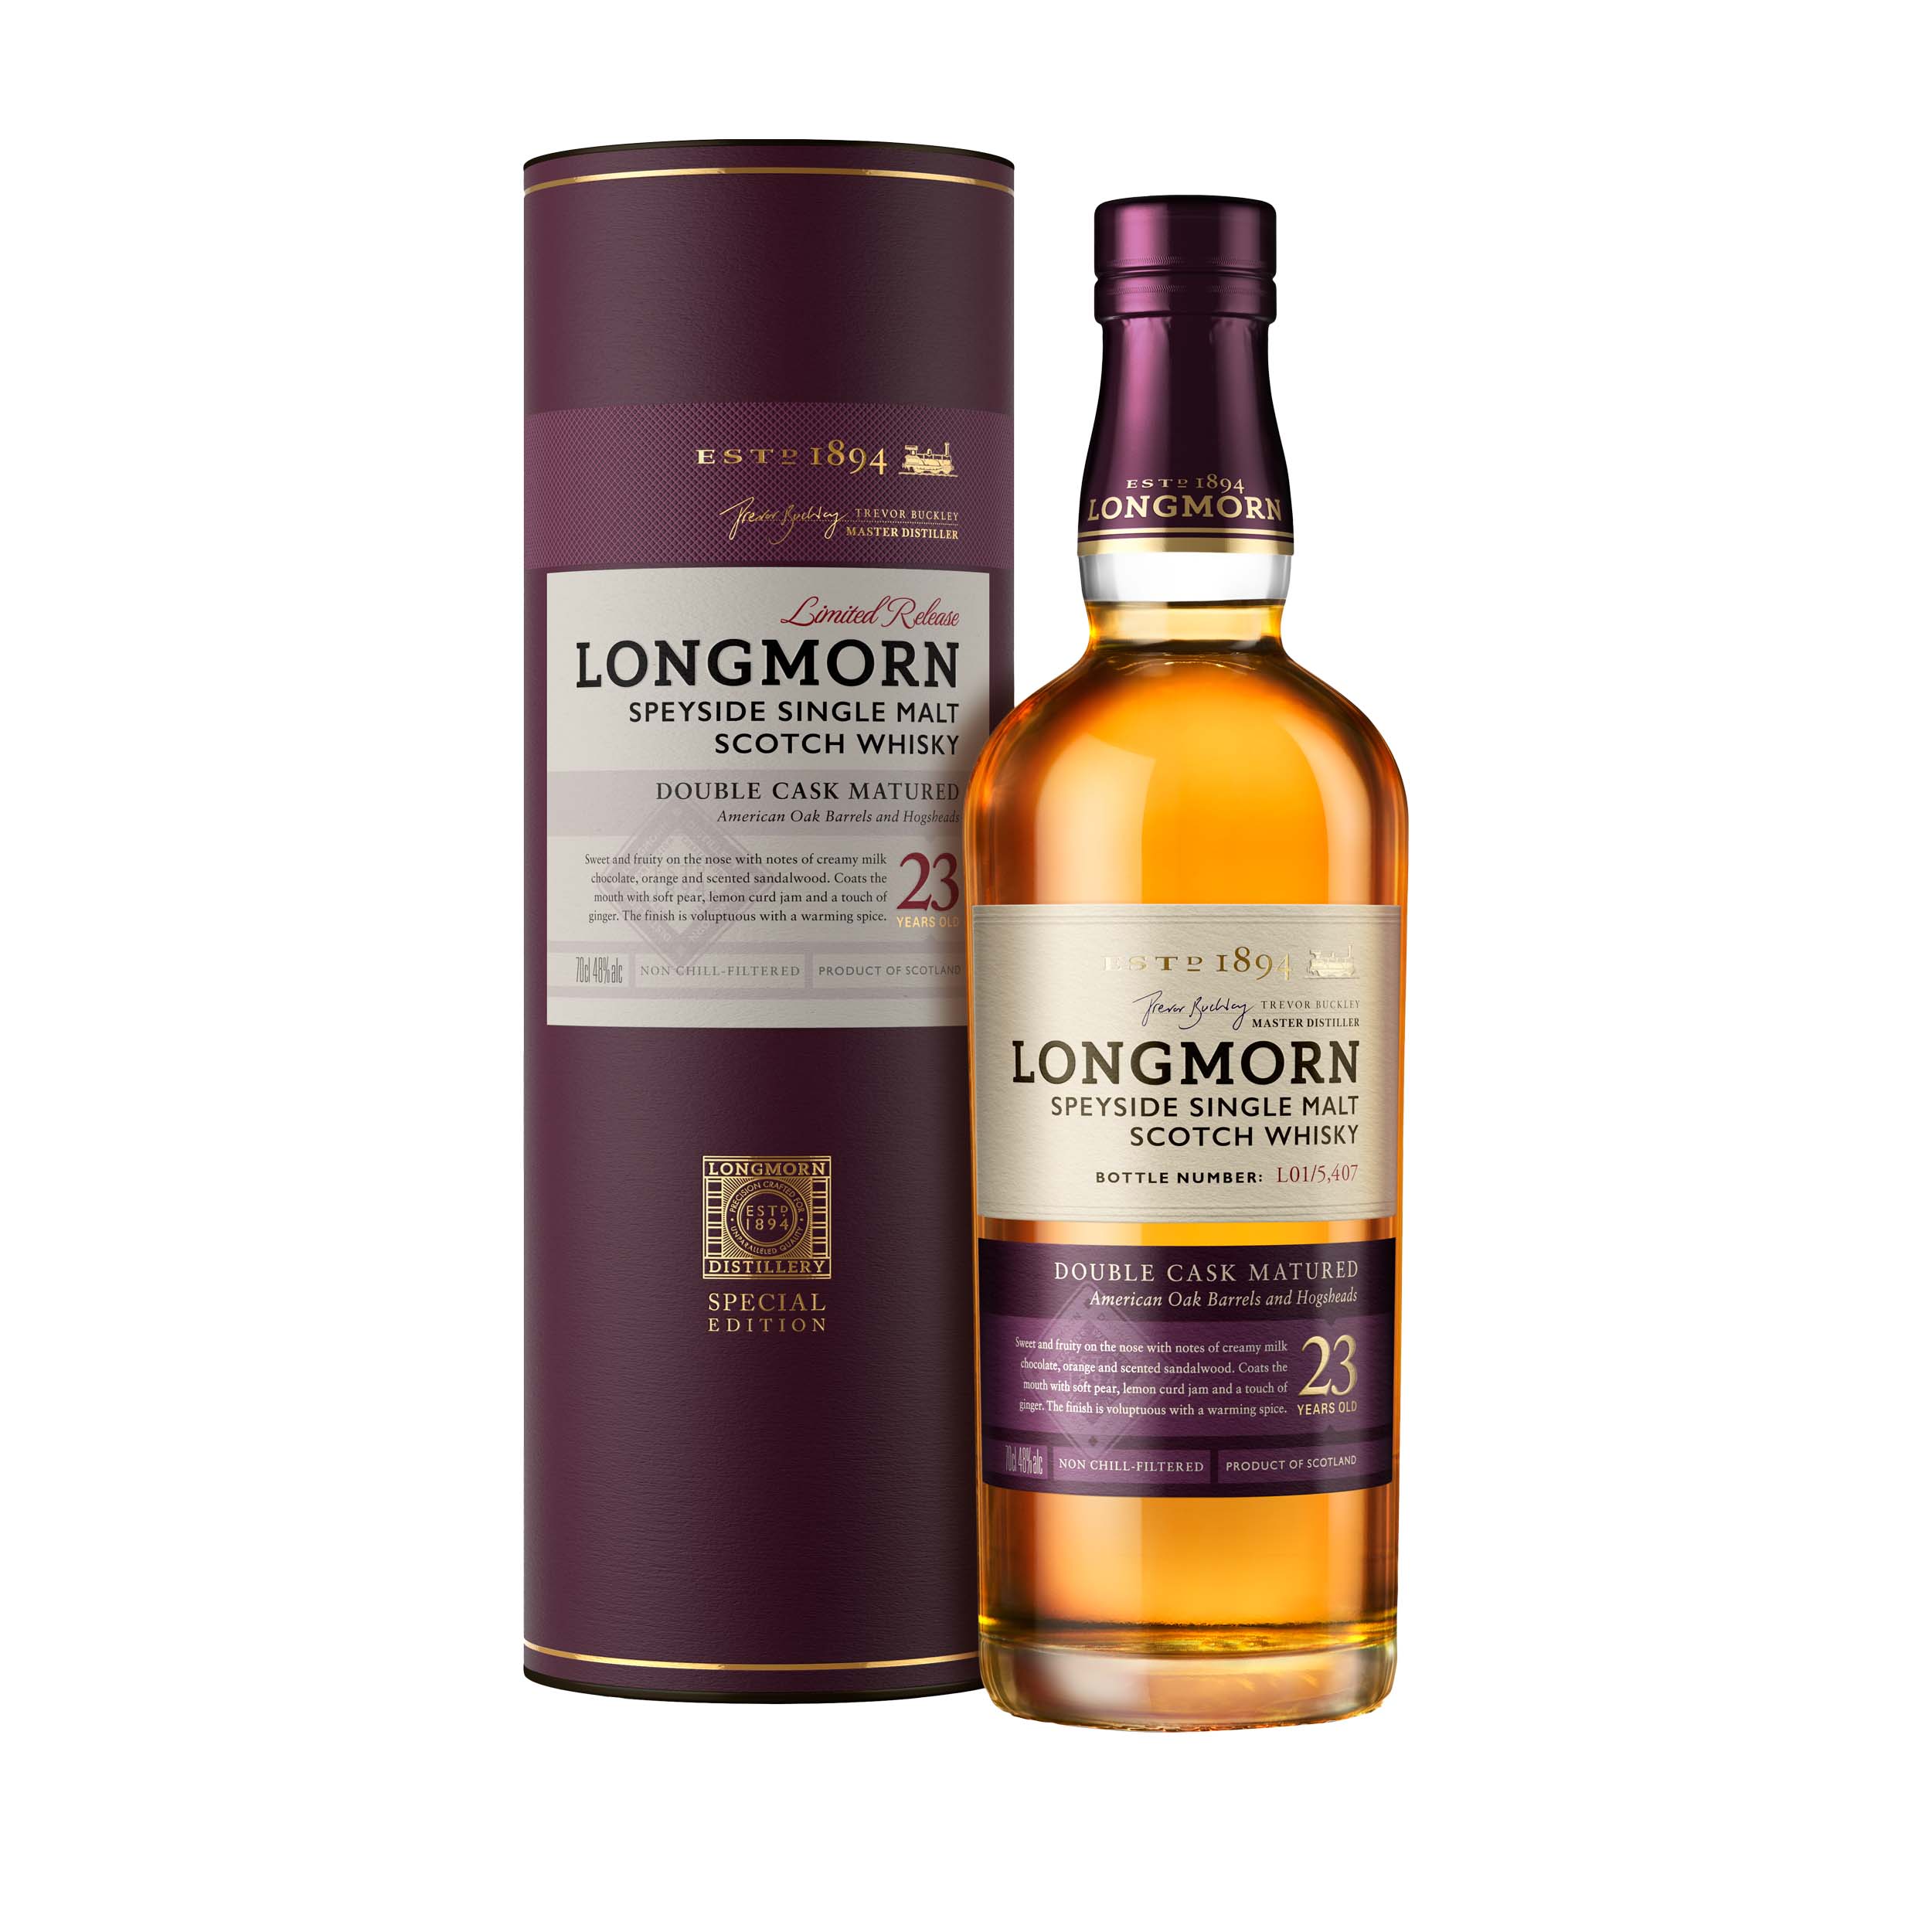 Longmorn 23 Years Old Double Cask Matured 48% Vol. 0,7l in Giftbox